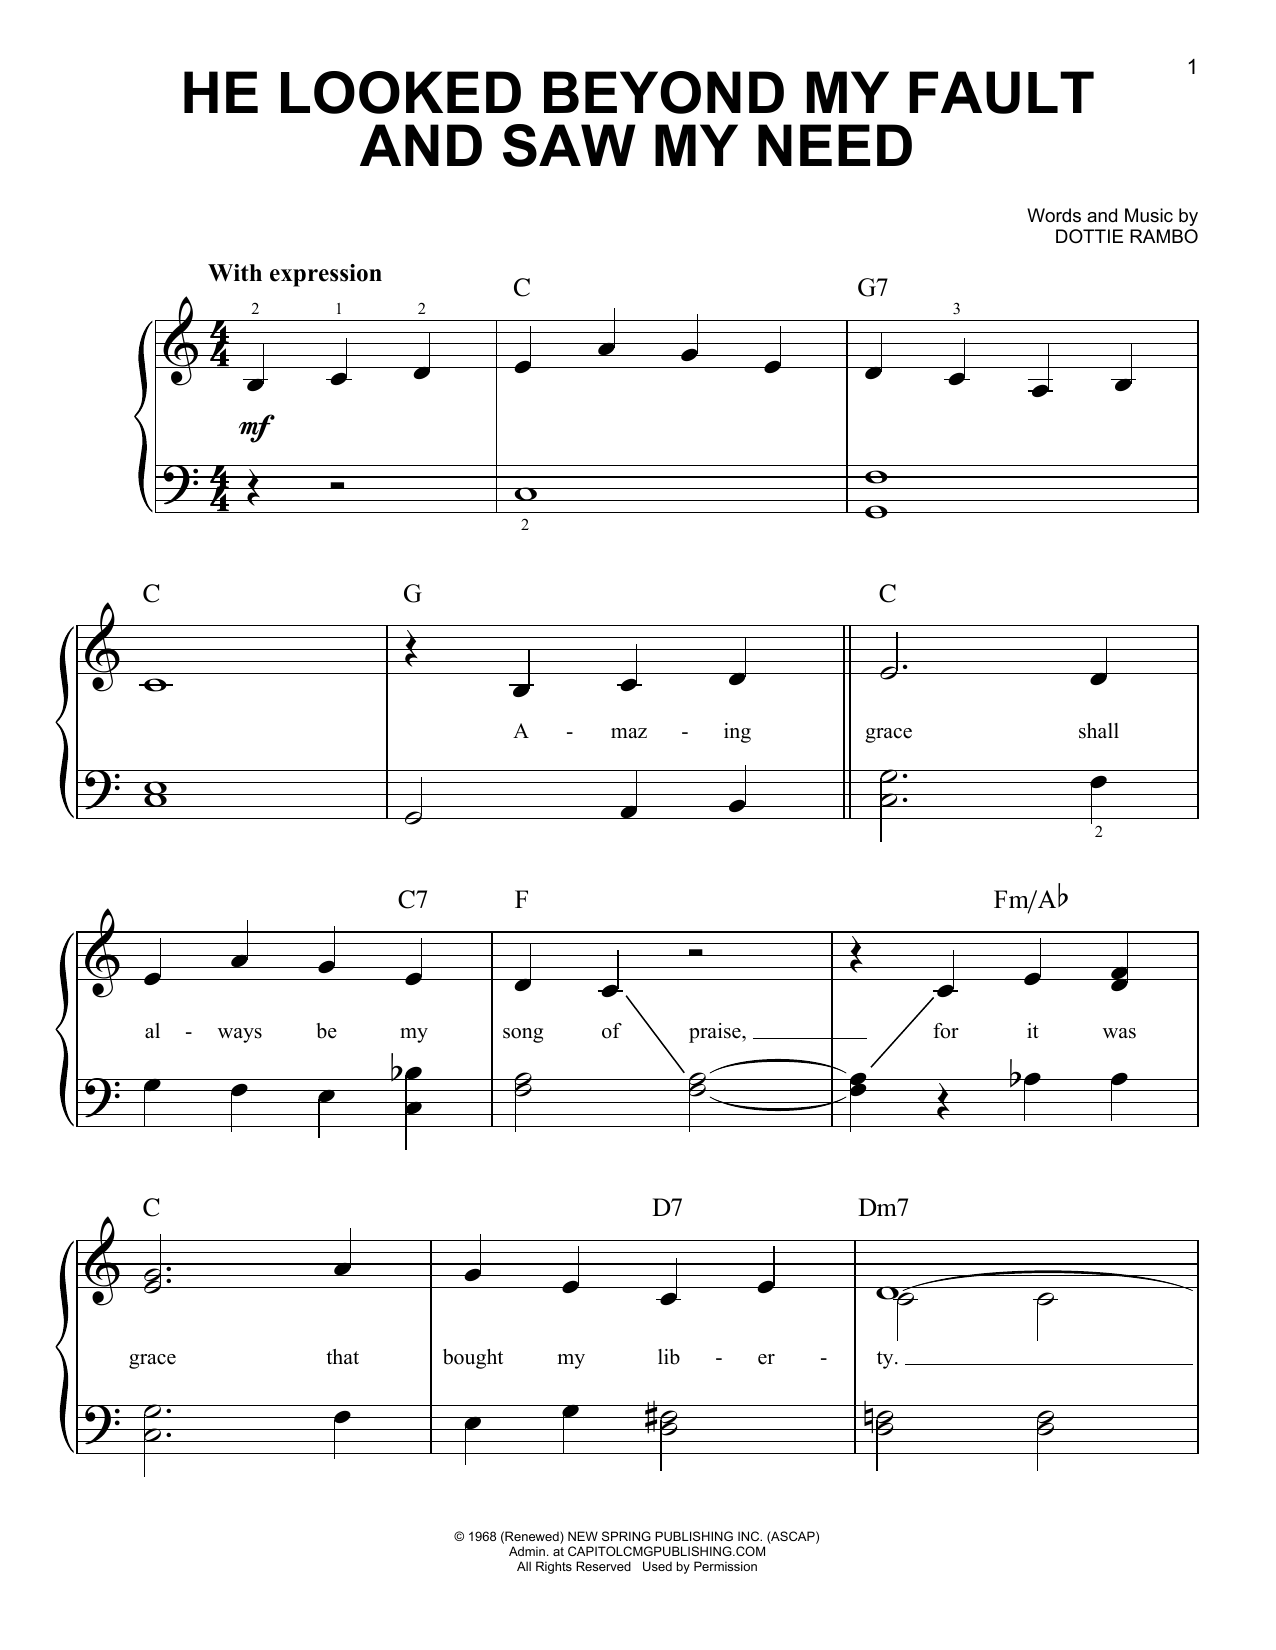 Dottie Rambo He Looked Beyond My Fault And Saw My Need sheet music notes and chords. Download Printable PDF.